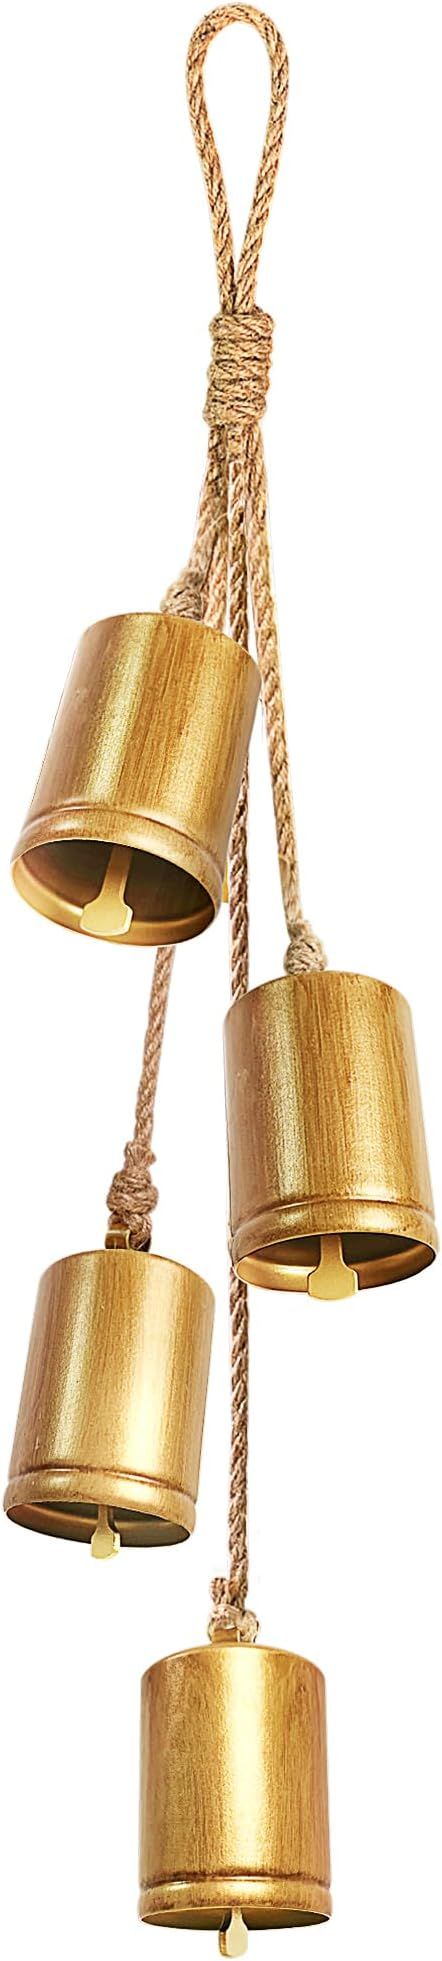 KPCB Christmas Bells for Decoration, Brass Vintage Rustic Bells Set of 4, Hanging Gold Ornaments ... | Amazon (US)